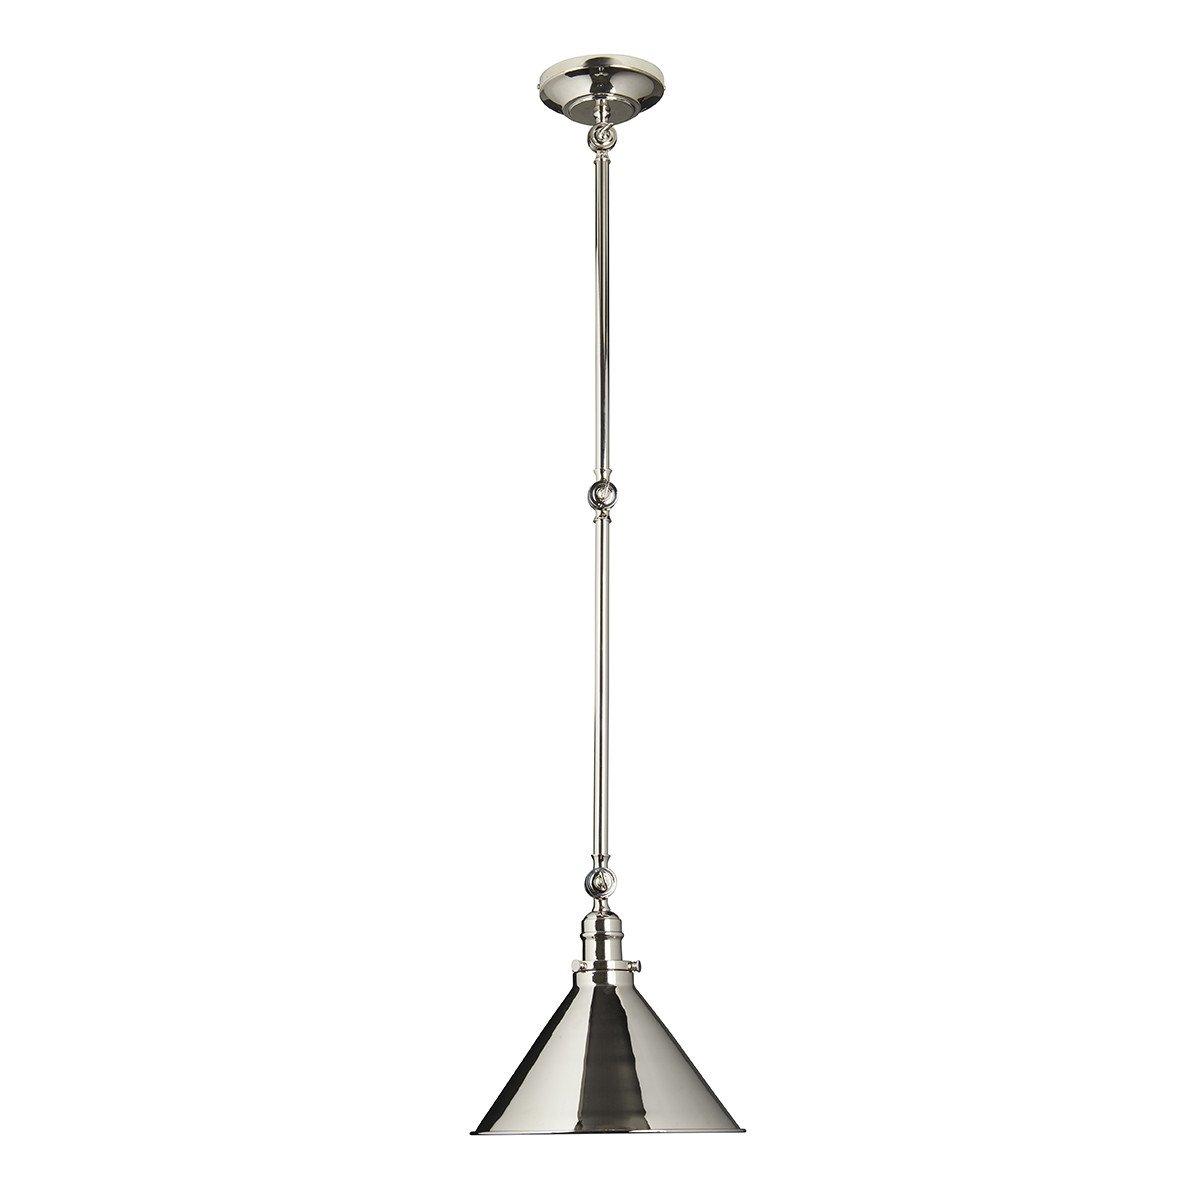 Provence 1 Light Indoor Wall Ceiling Light Polished Nickel E27